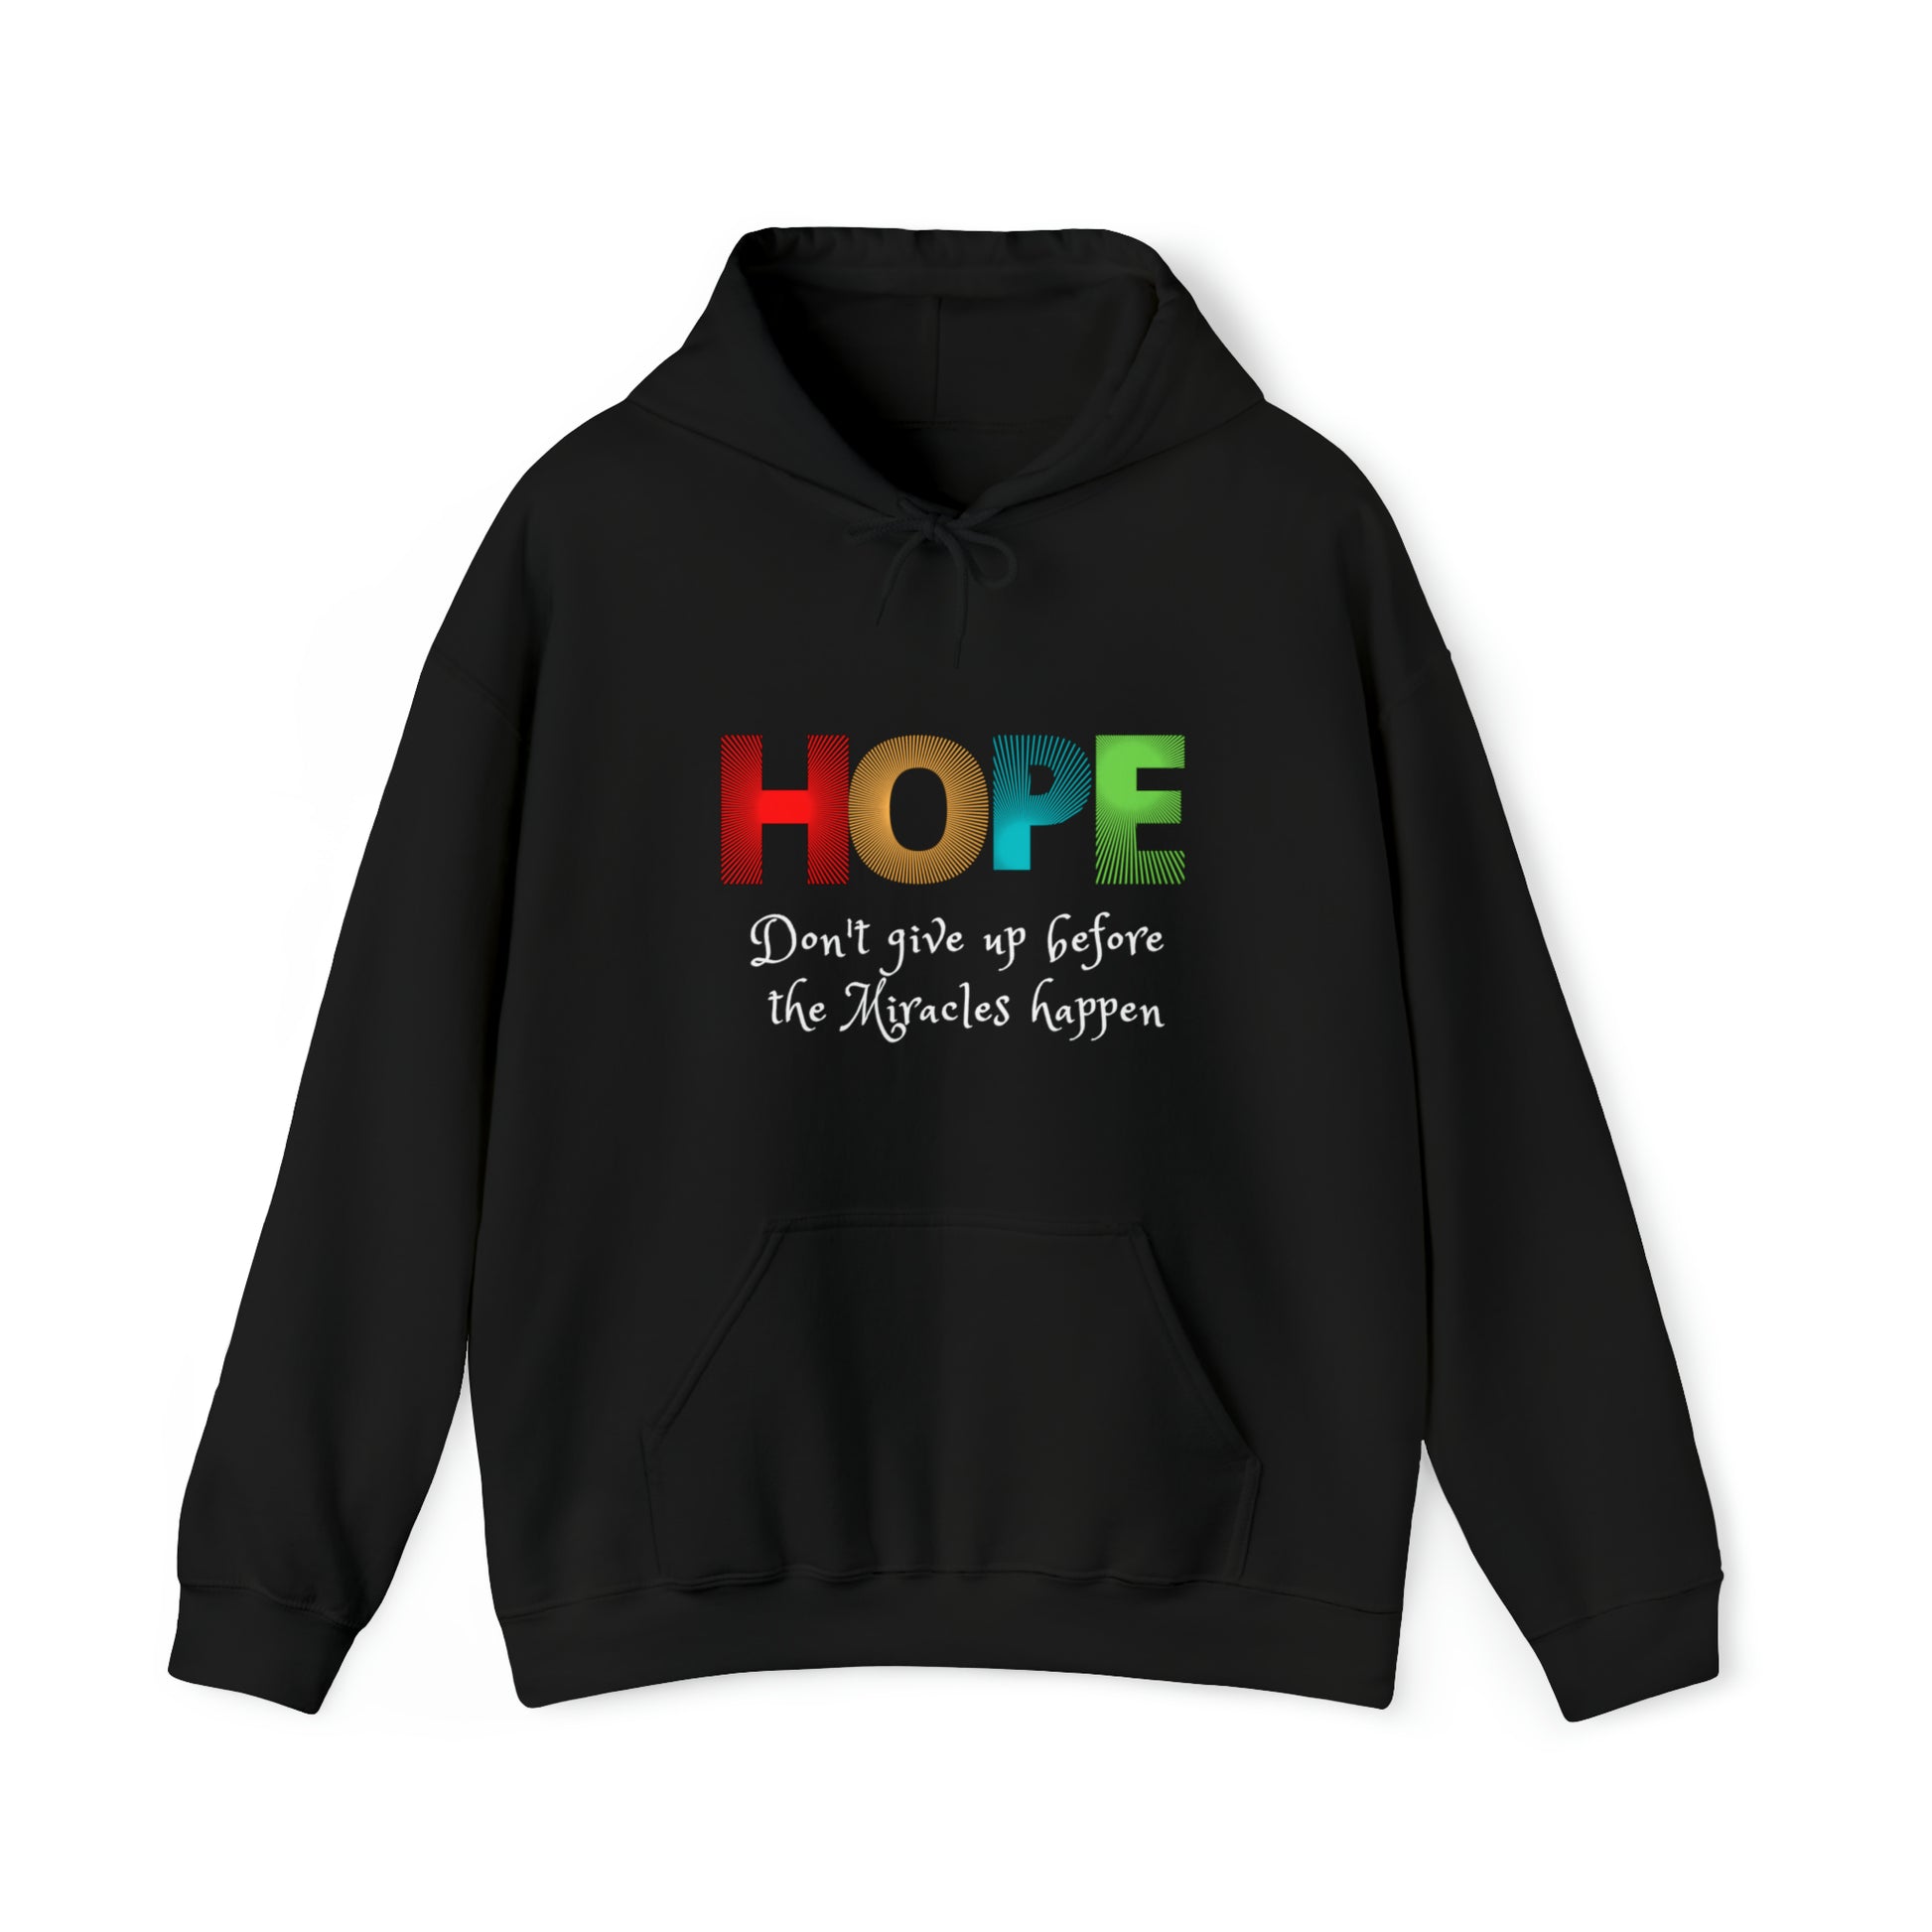 "HOPE Don't give Up Before the Miracles Happen" Unisex Hoodie from Celebrate Sobriety Gifts.com